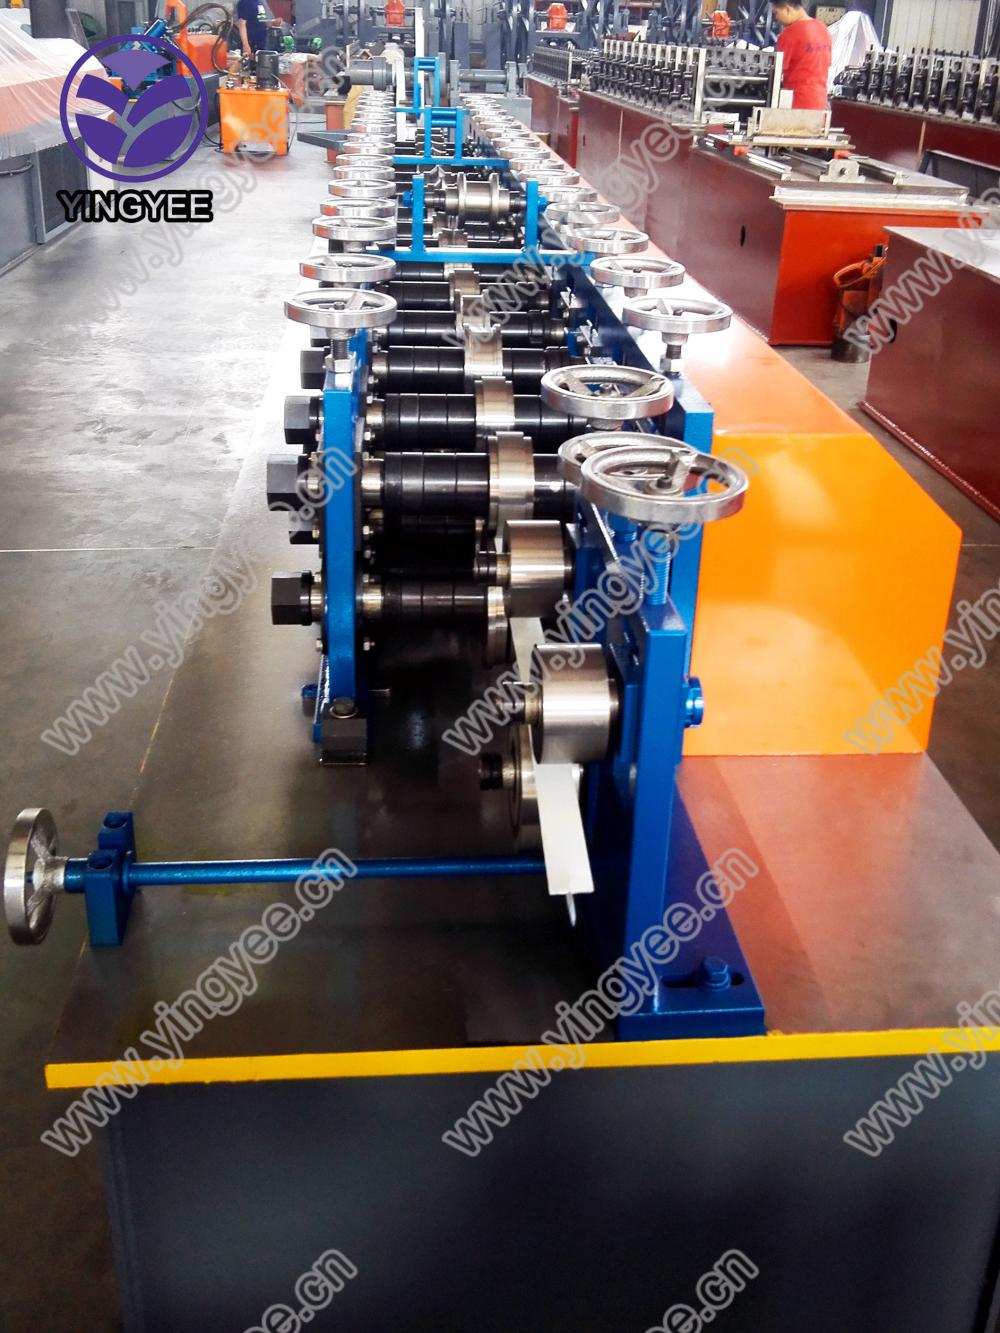 T Ceiling Bar Machine From Yingyee003